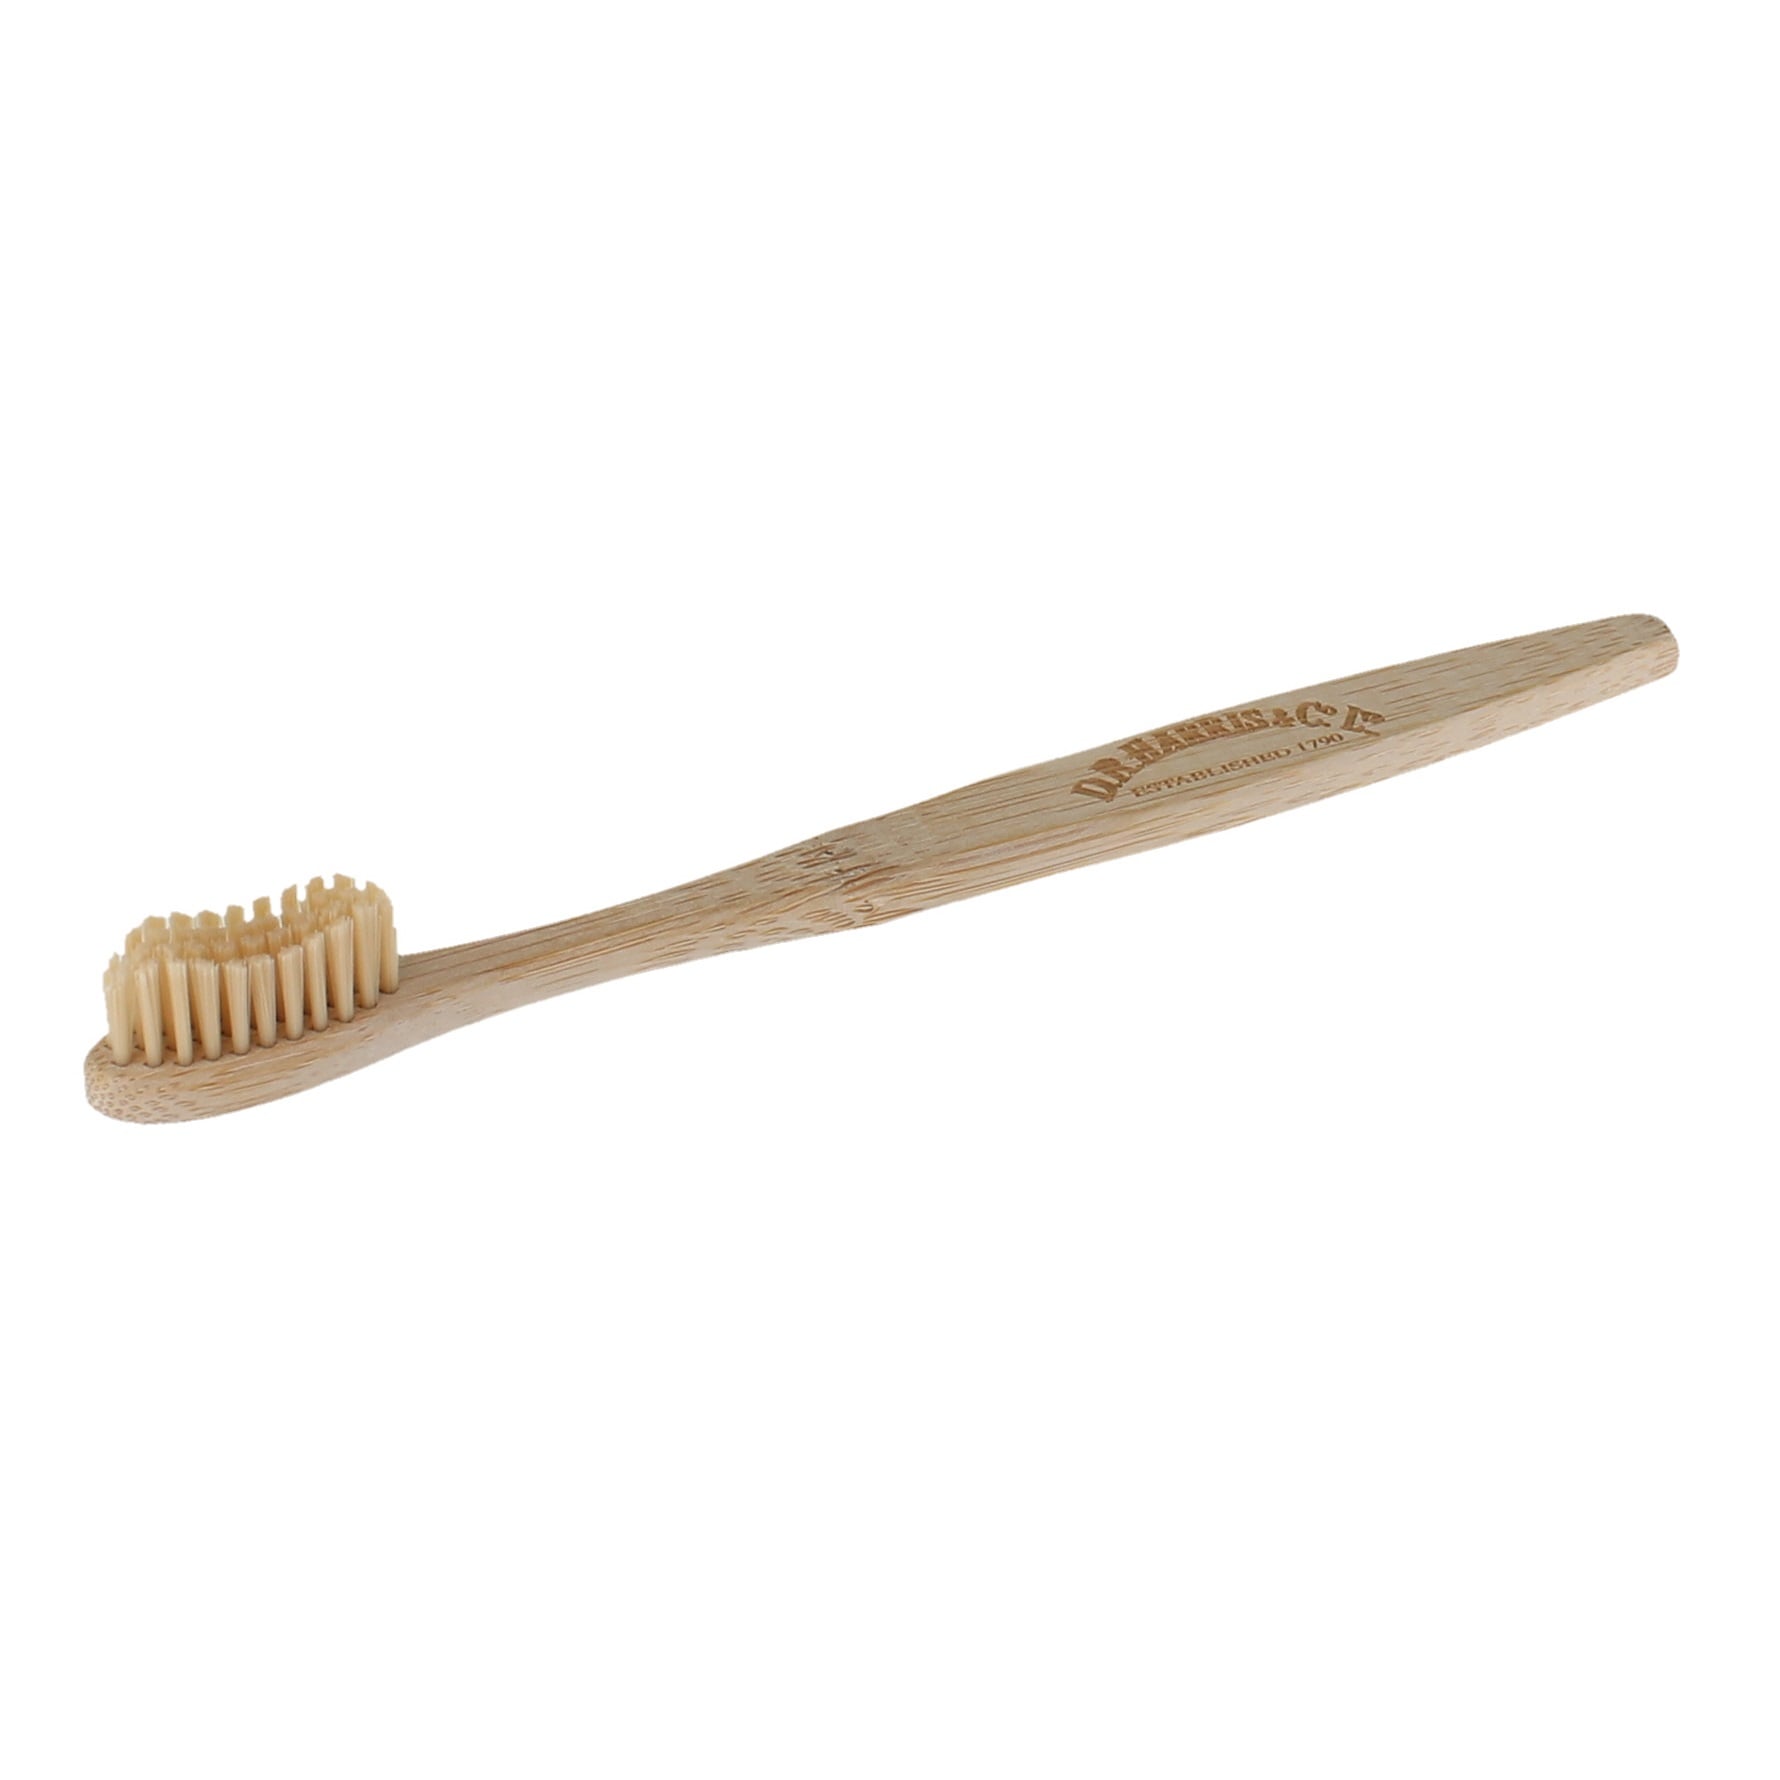 D.R. Harris Natural Colour Bristle Biodegradable Bamboo Toothbrush